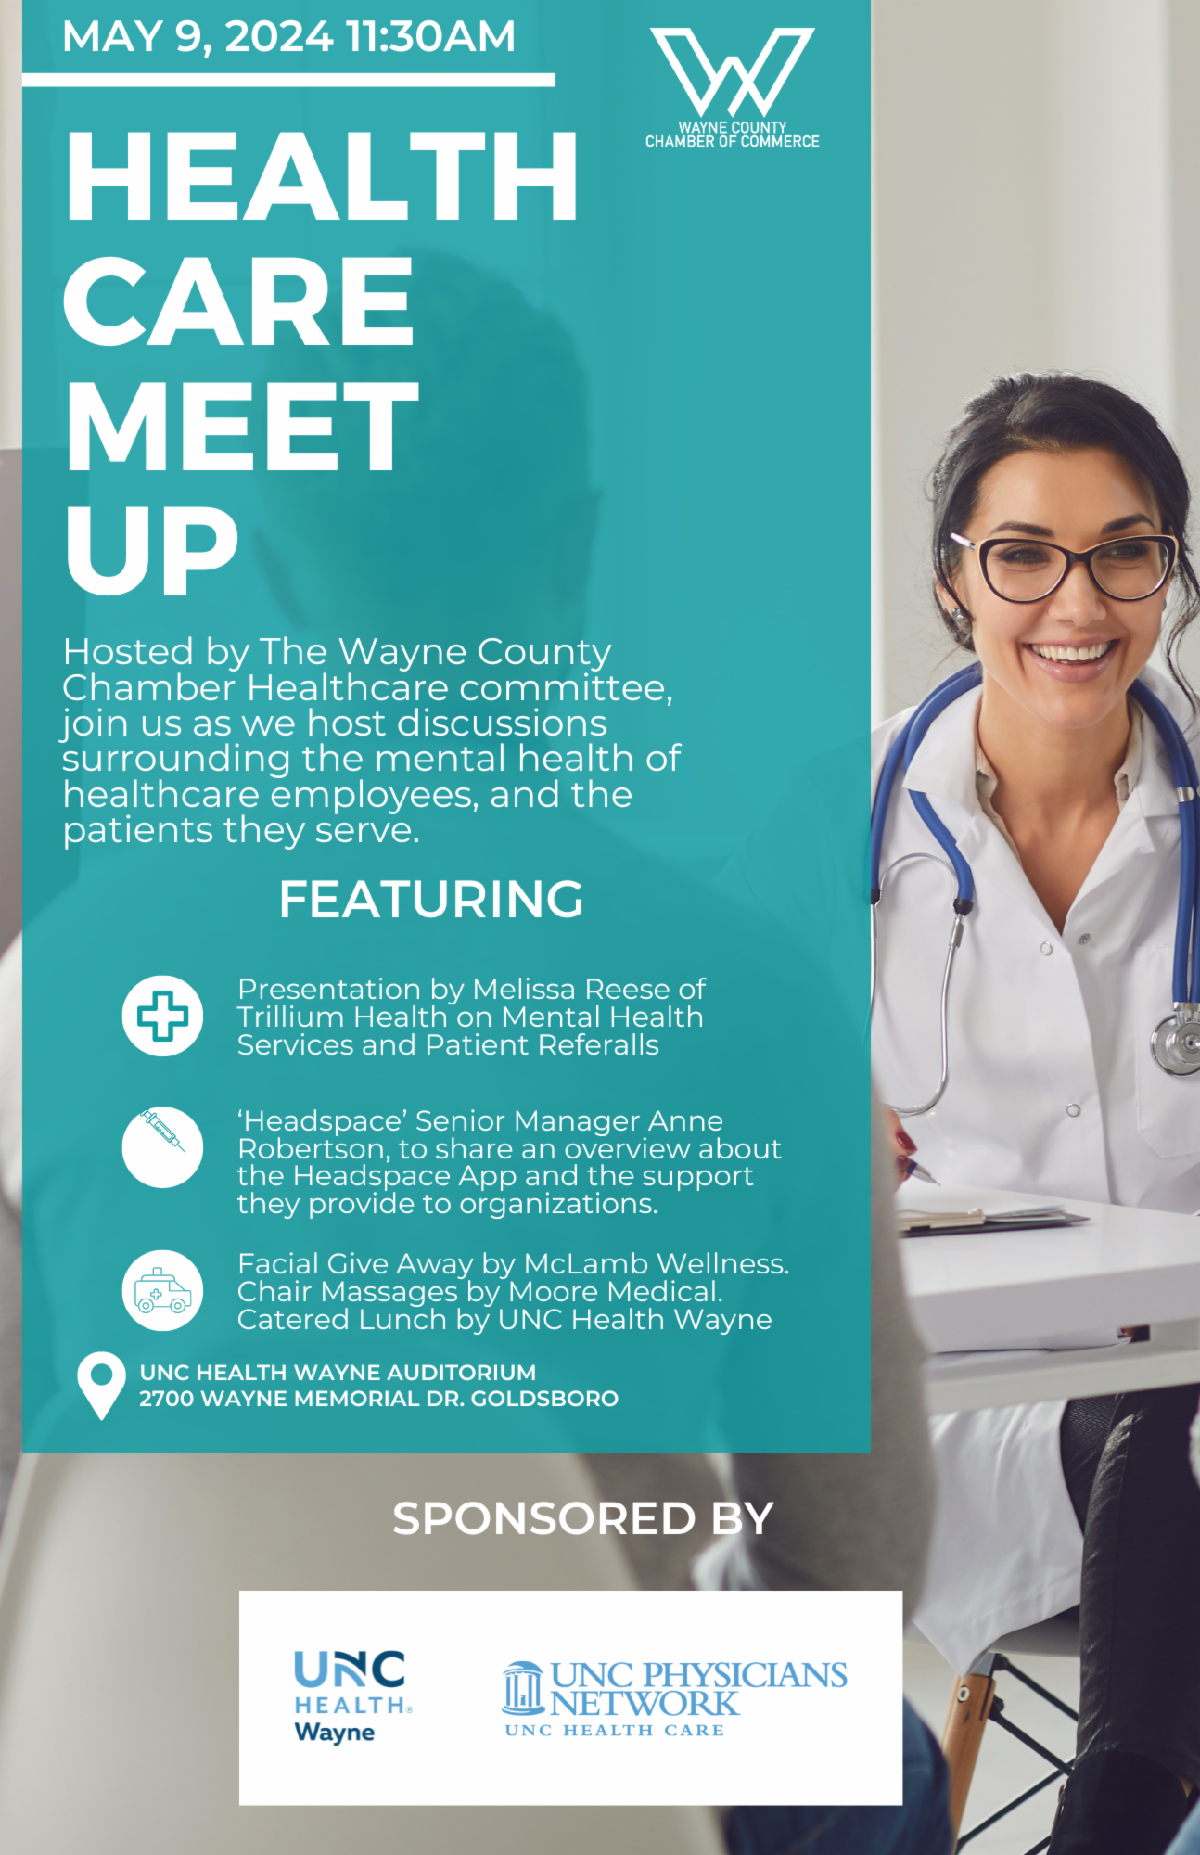 Health Care Meet Up Being Held on Thursday